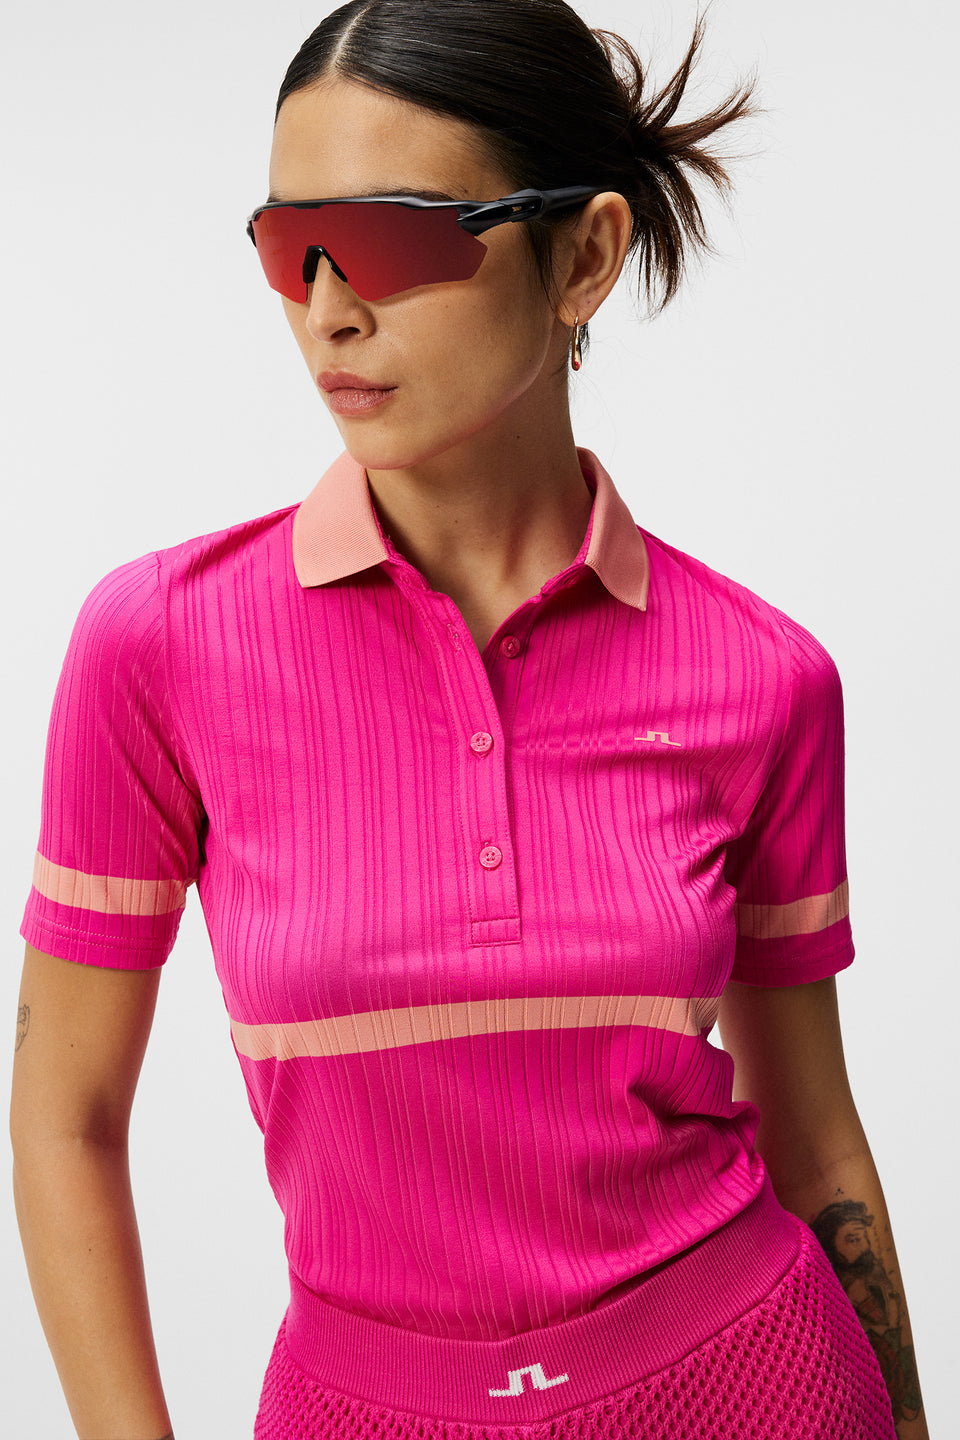 Modern Golf Clothing for Women - J.Lindeberg – Page 2